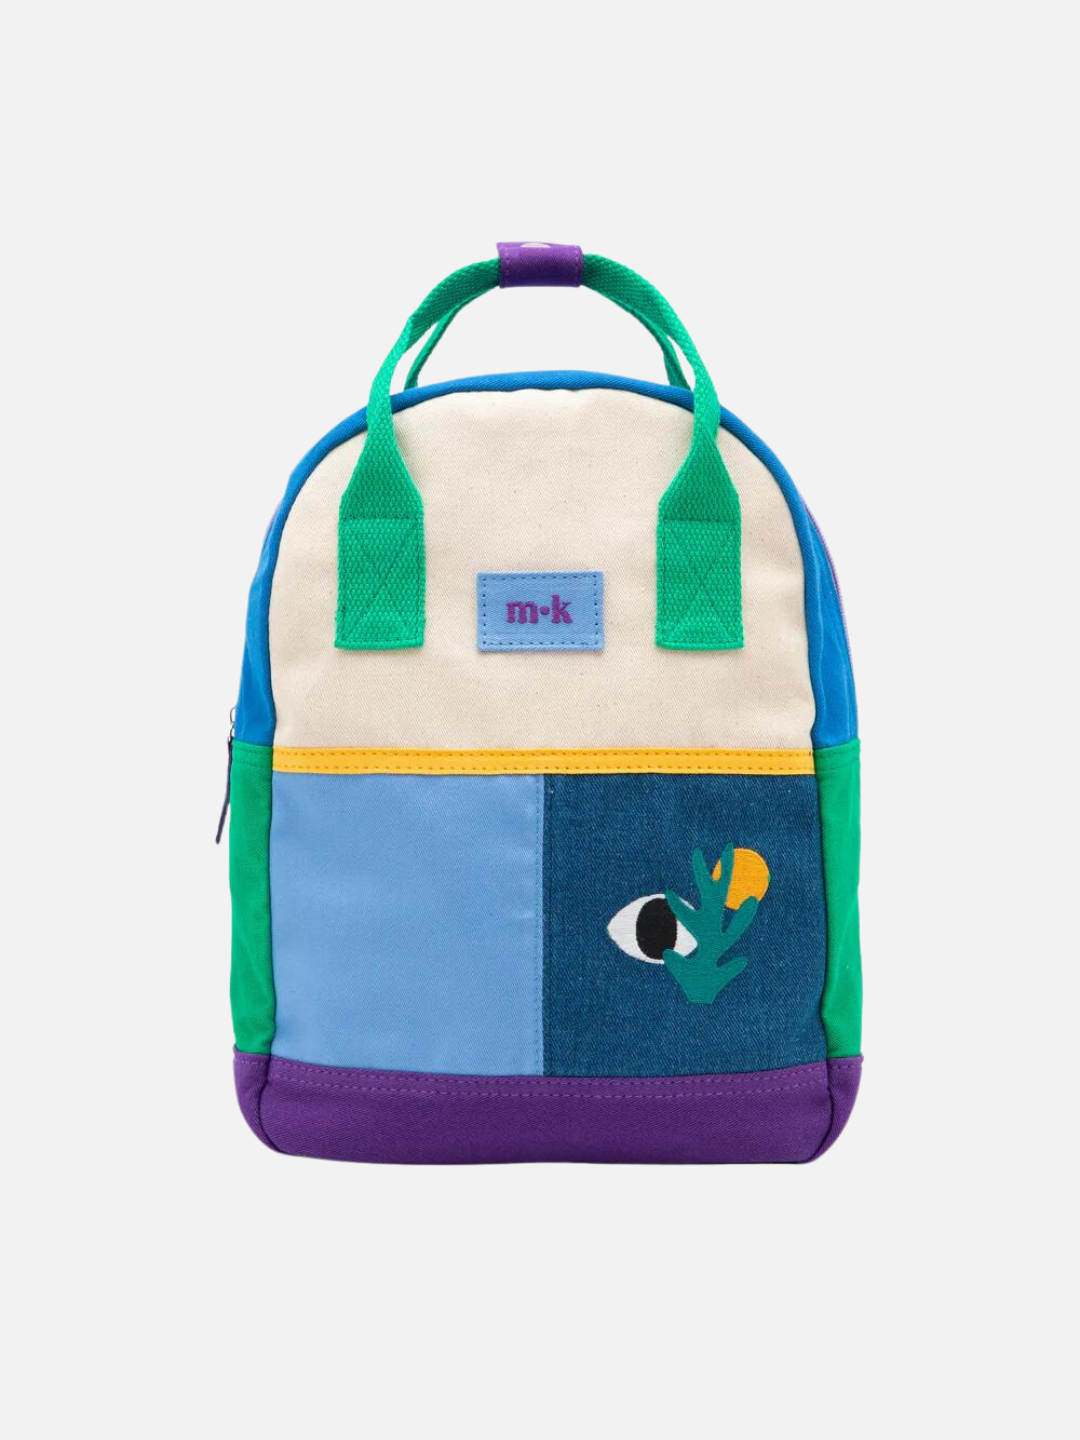 Banana Haven | A colorblock backpack with green handles and sides, purple base and two blue patches below a cream top, one with images of an eye, a sun and a plant